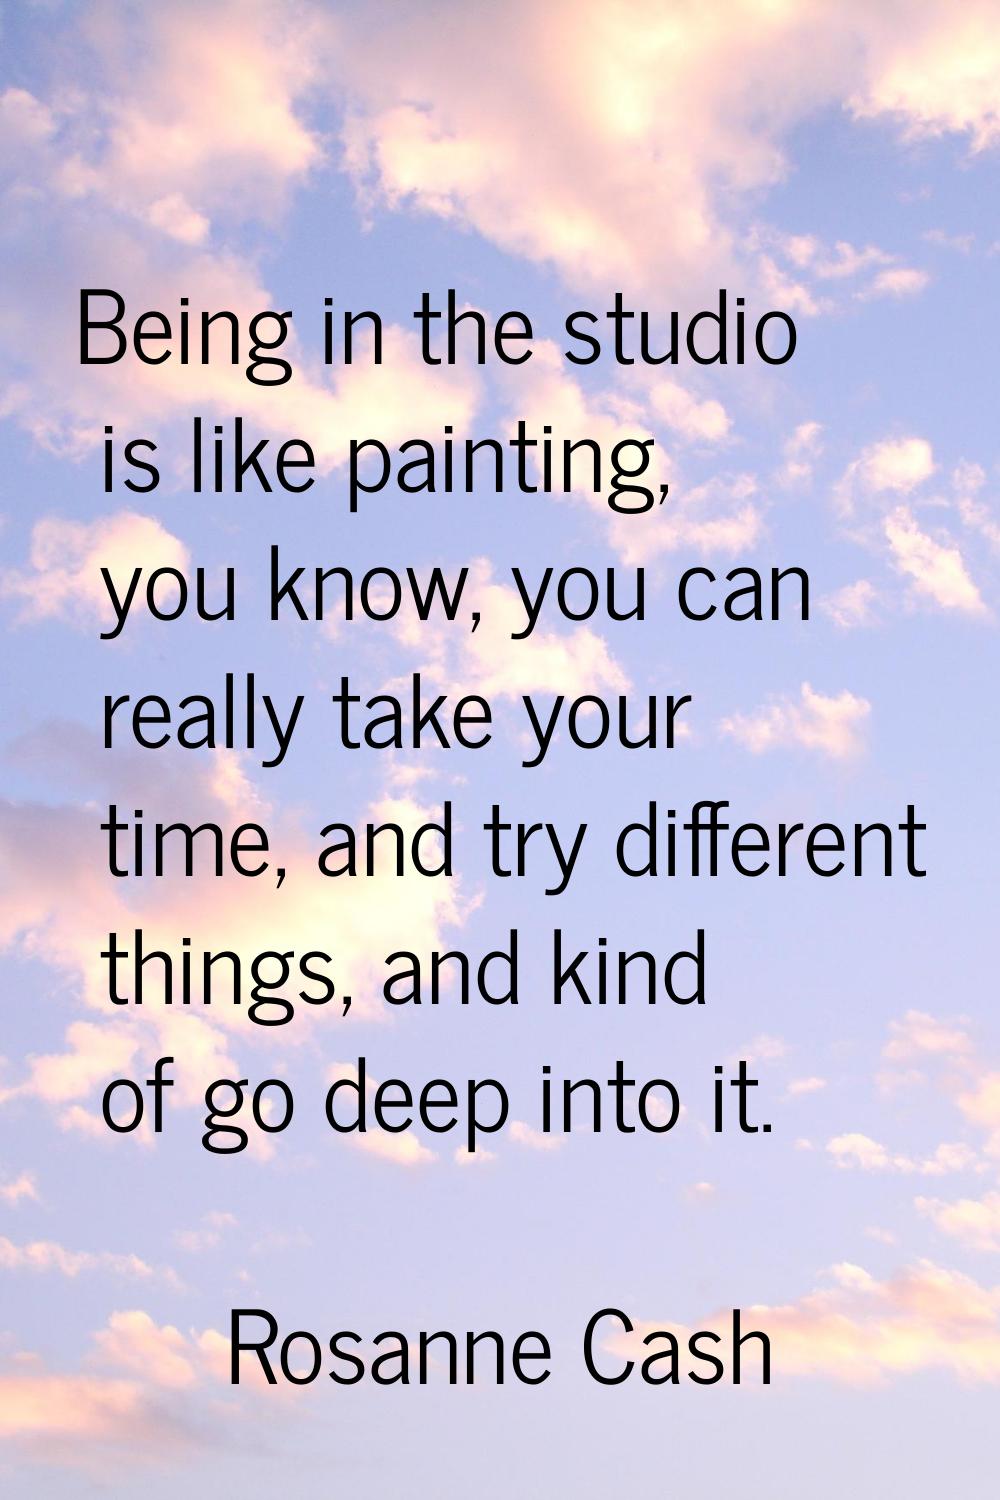 Being in the studio is like painting, you know, you can really take your time, and try different th